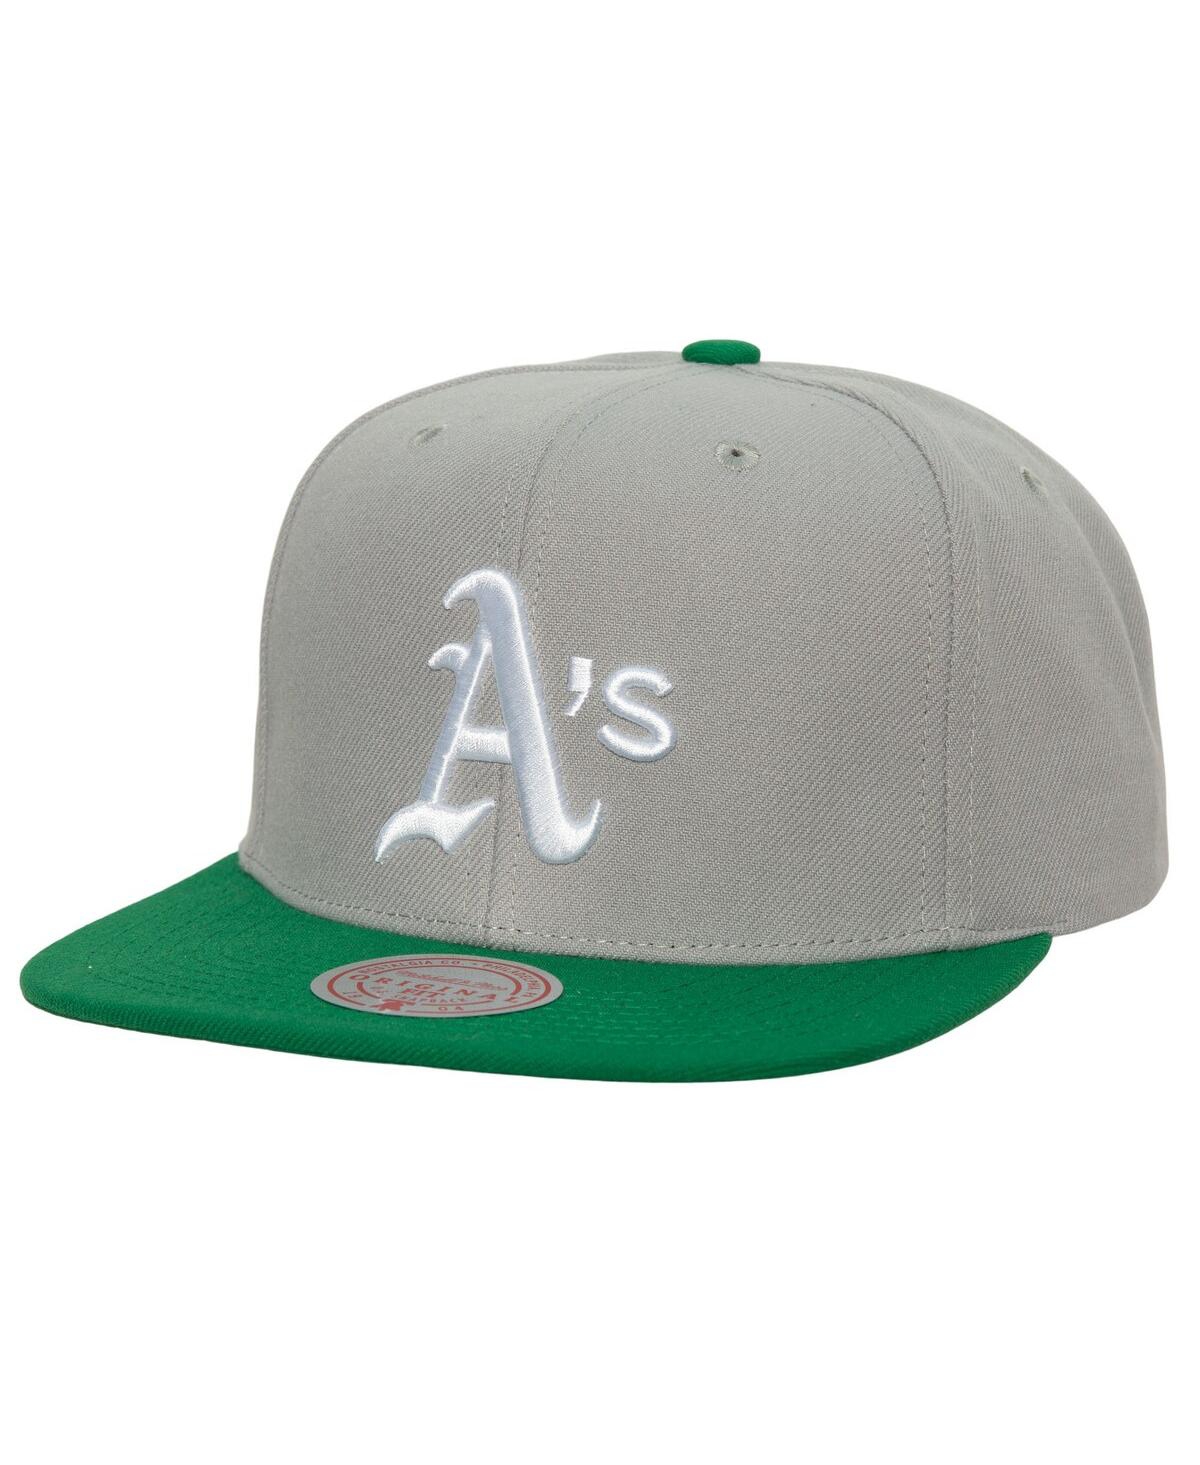 Mitchell & Ness Men's  Gray Oakland Athletics Cooperstown Collection Away Snapback Hat